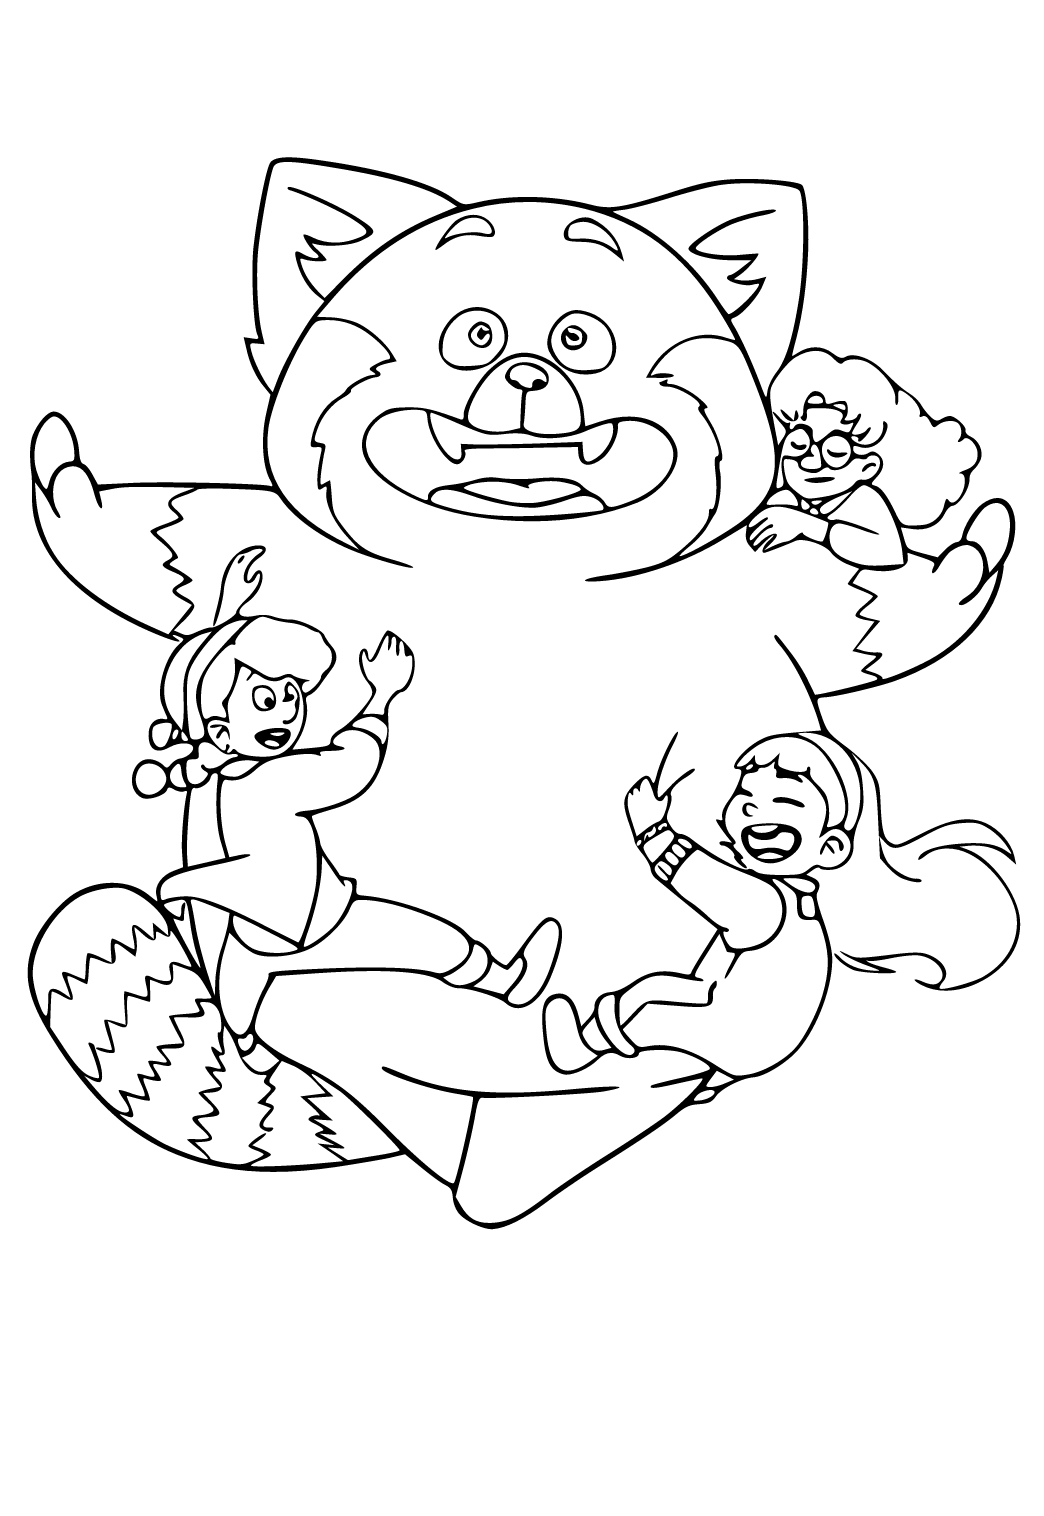 Free printable turning red friends coloring page for adults and kids